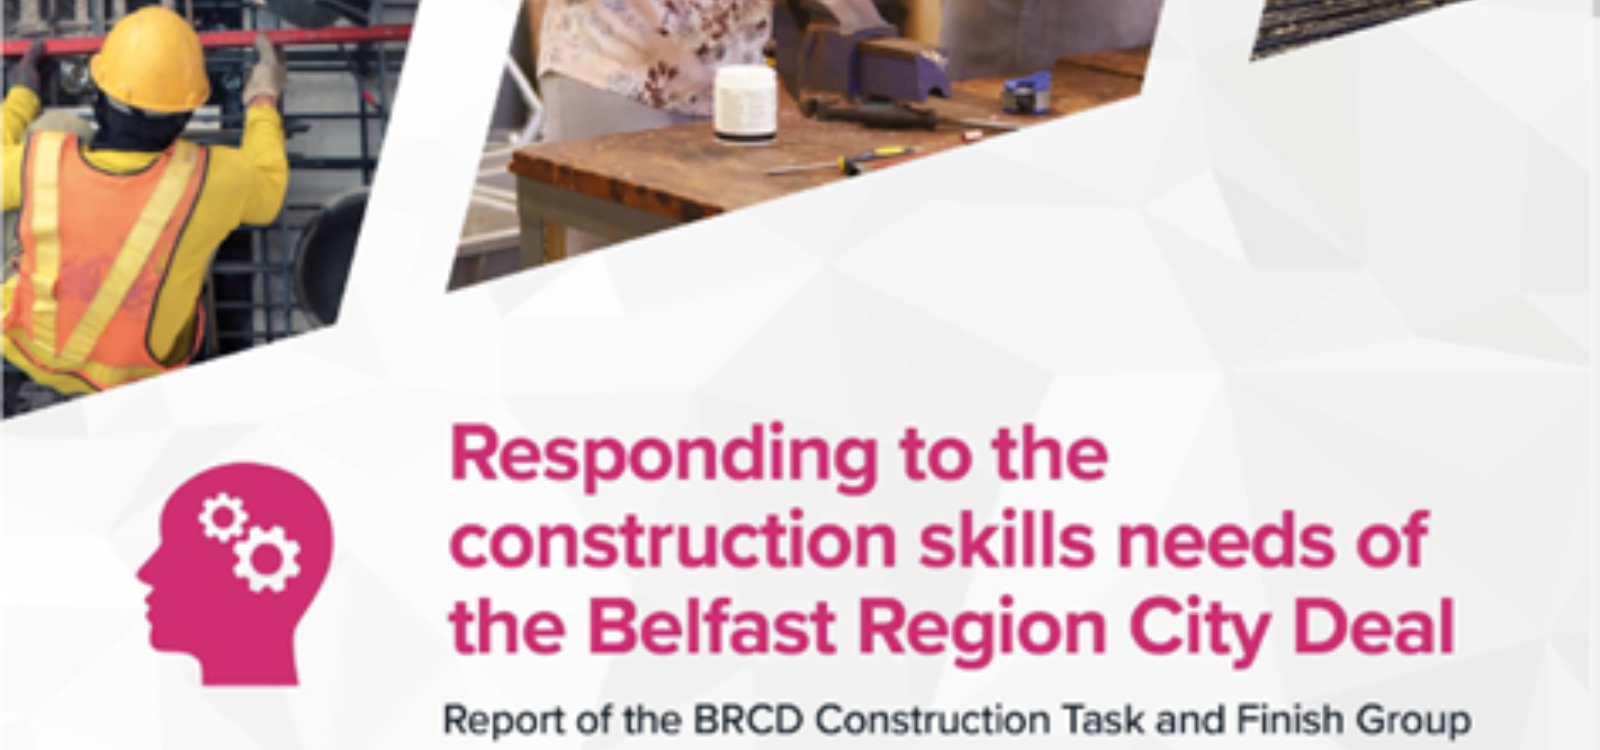 Responding to the construction skills needs of the Belfast Region City Deal - Executive Summary view publication